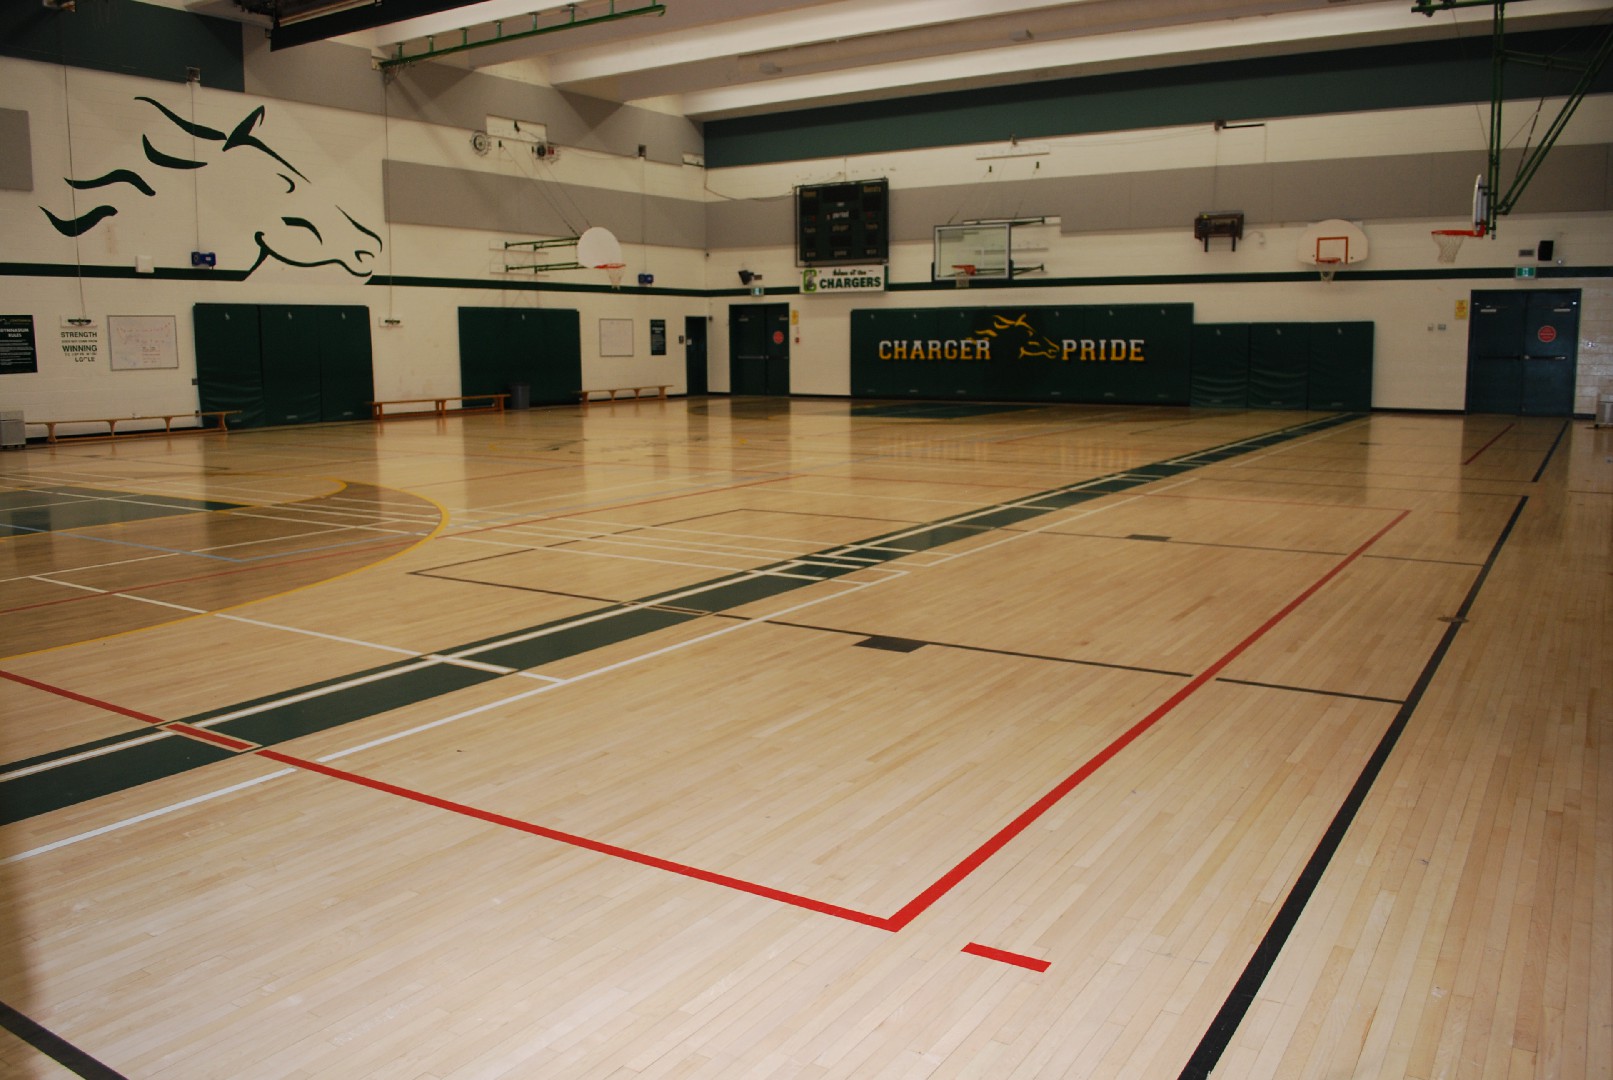 Gym at CSS for Displays